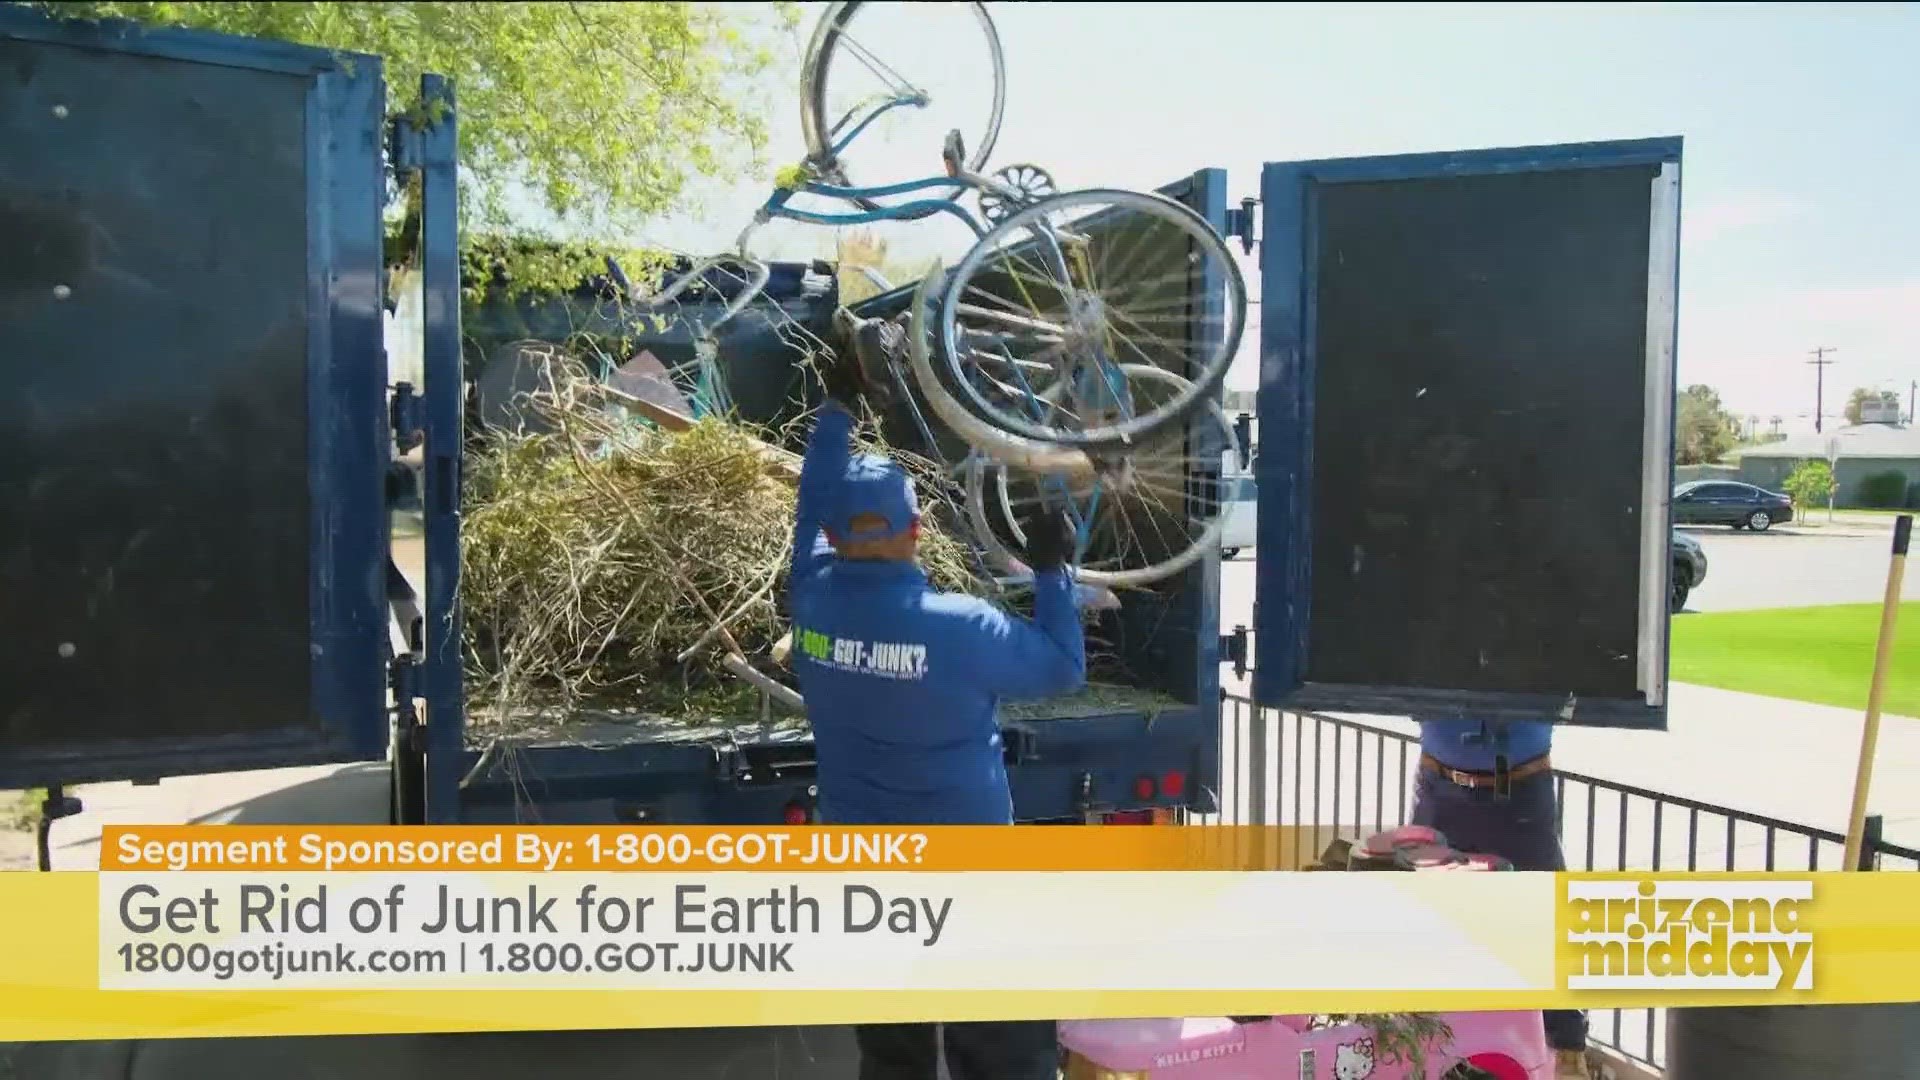 Jeremy Mummert joins us to tell us how 1-800-GOT-JUNK is keeping 70% of the items they collect out of landfills.